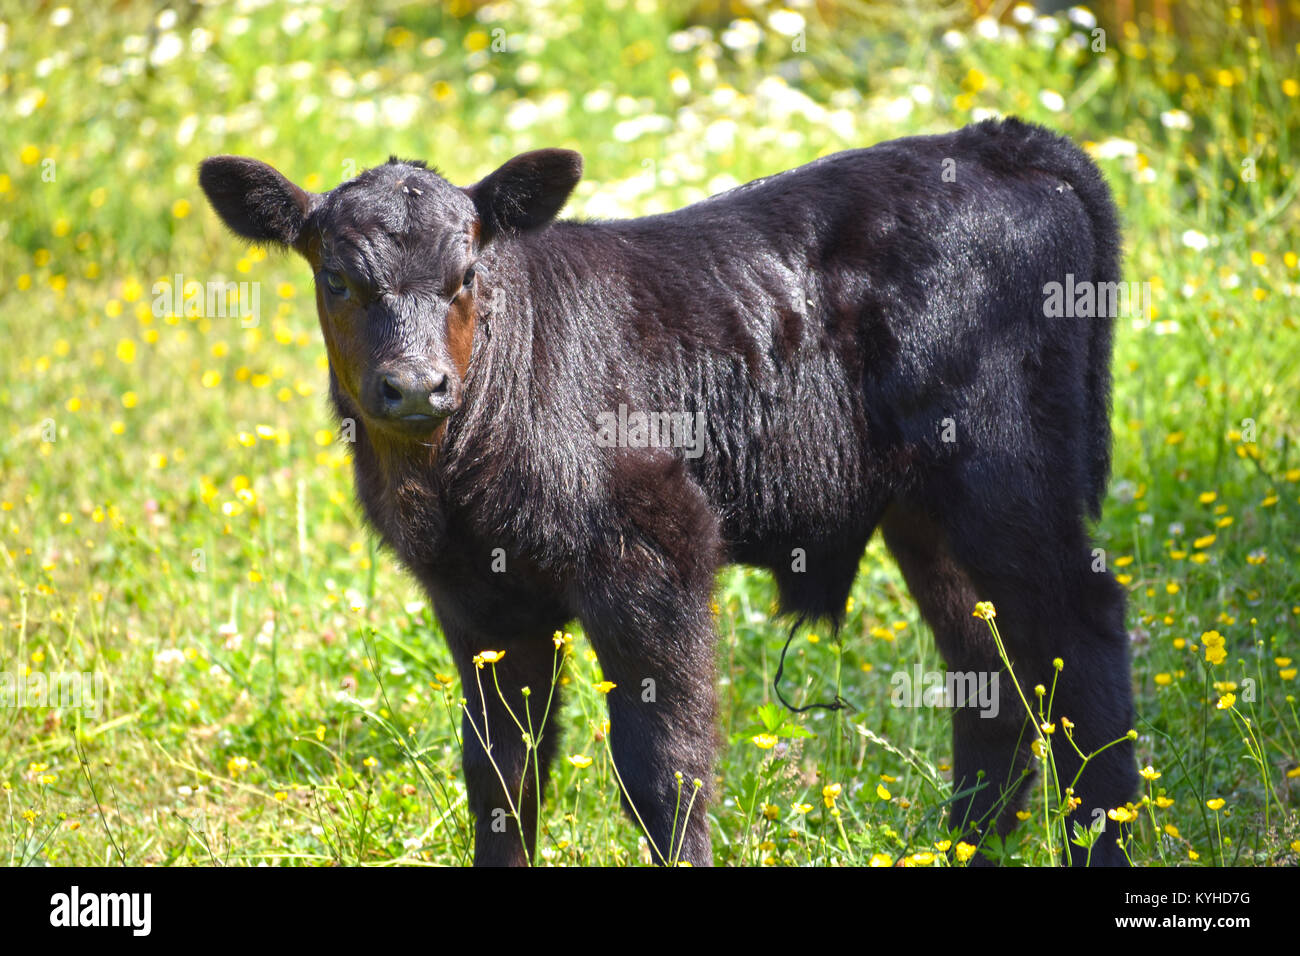 A bull calf in a field of tiny yellow flowers.  He has a couple flies on his head. Stock Photo